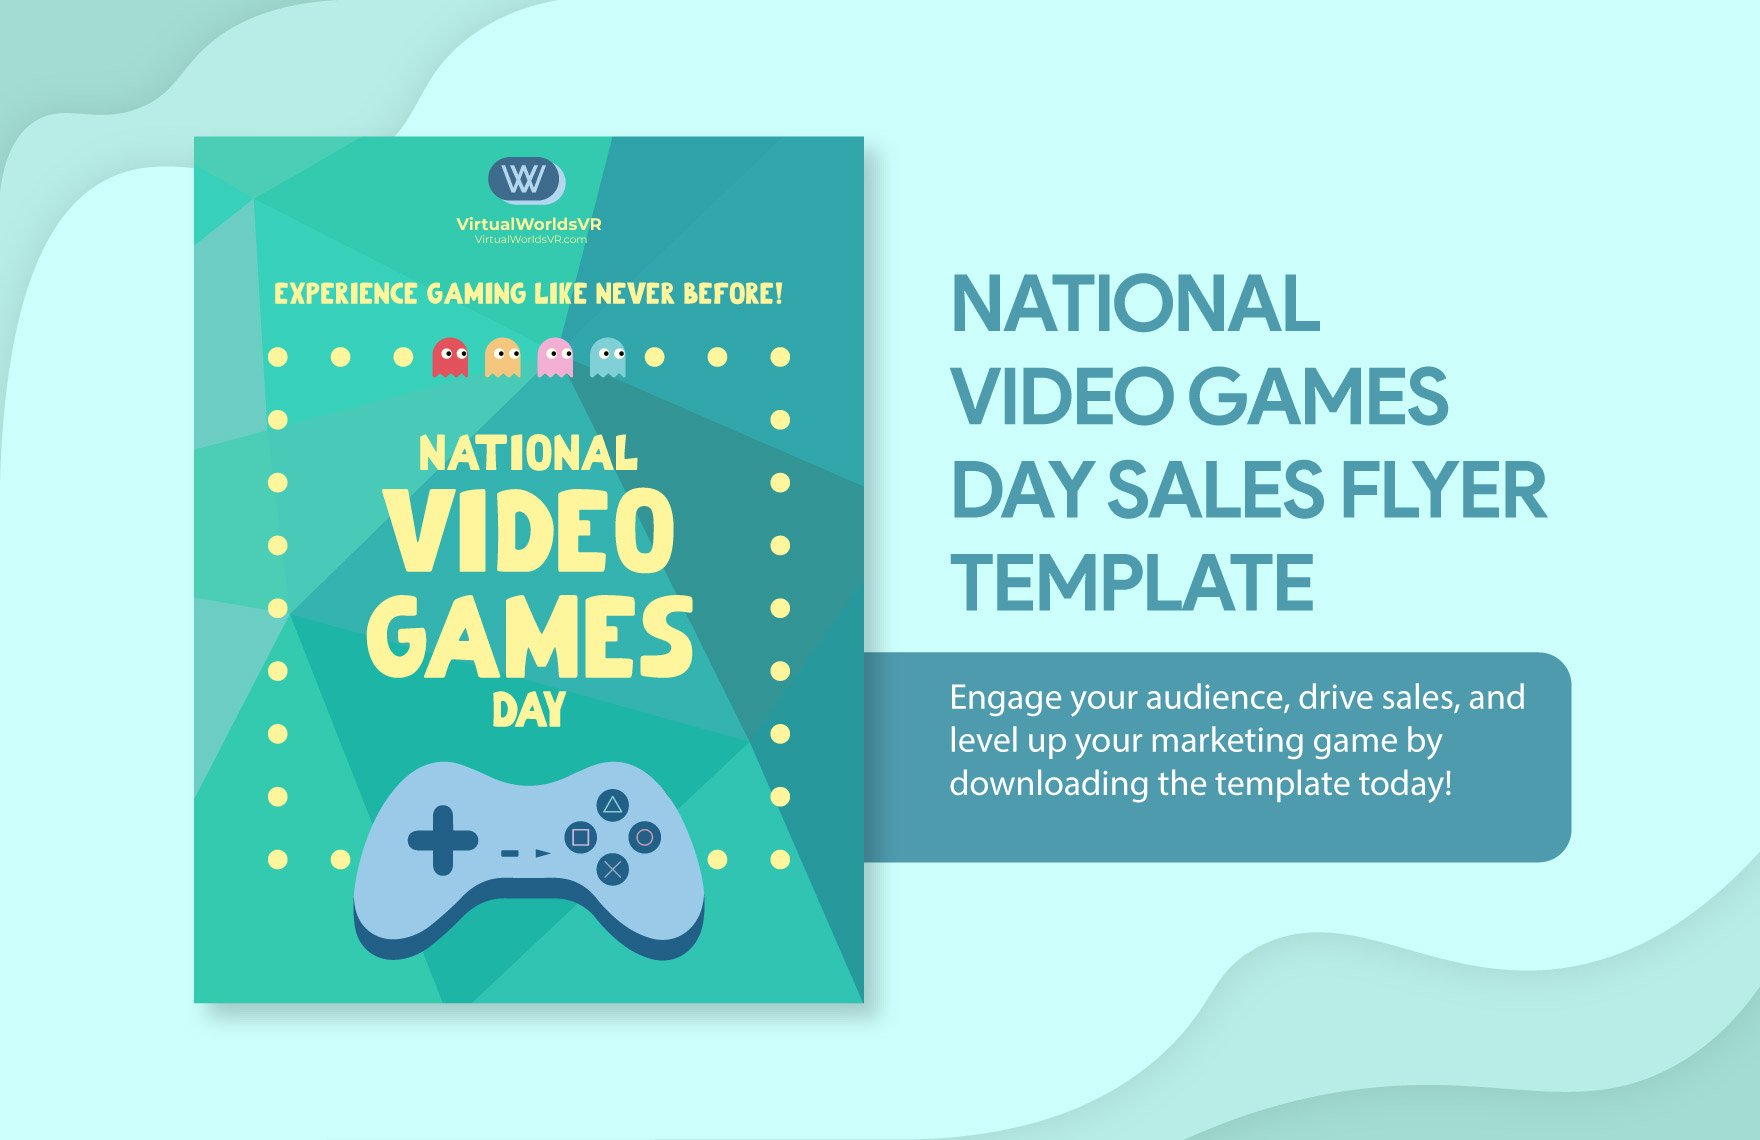 Free National Video Games Day Sales Flyer Template in Illustrator, PSD, PNG